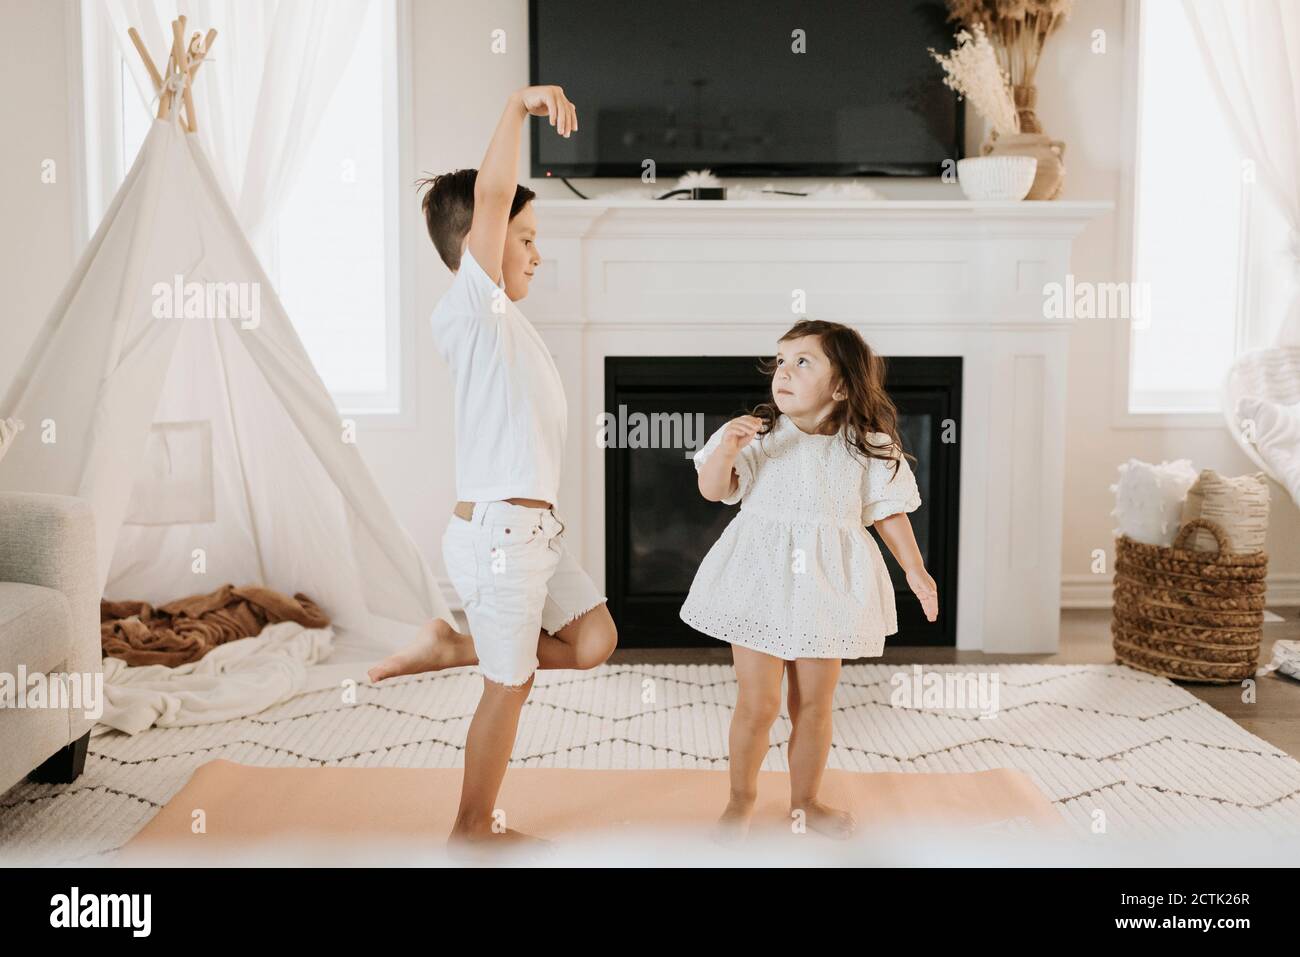 Sister looking at brother standing on one leg in living room Stock Photo